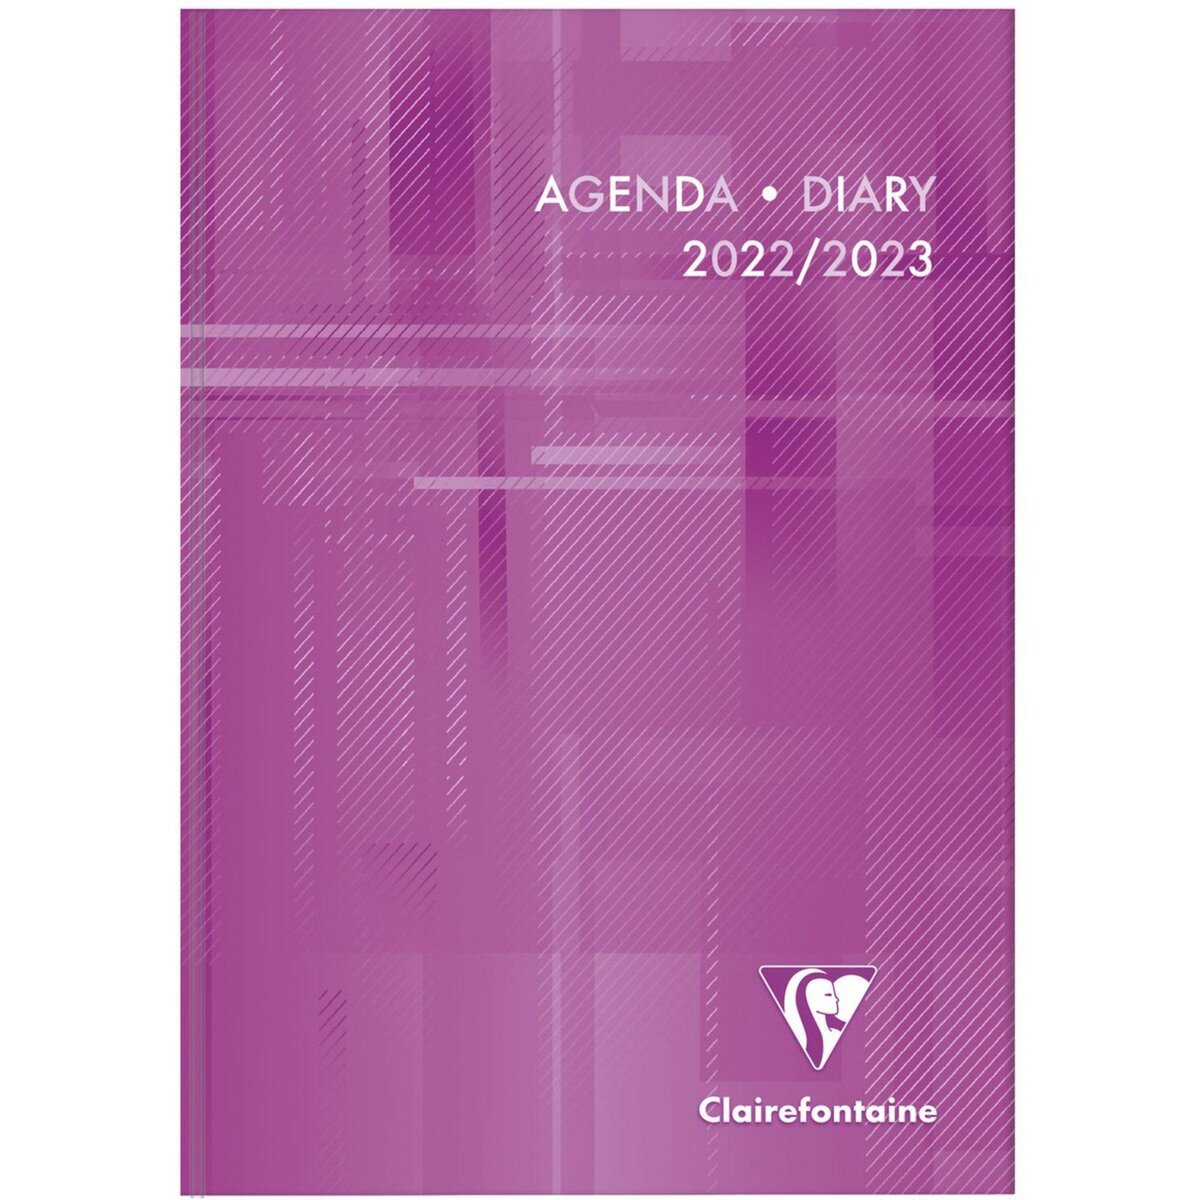 CLAIREFONTAINE Agenda scolaire journalier 12x17cm rose 2022-2023